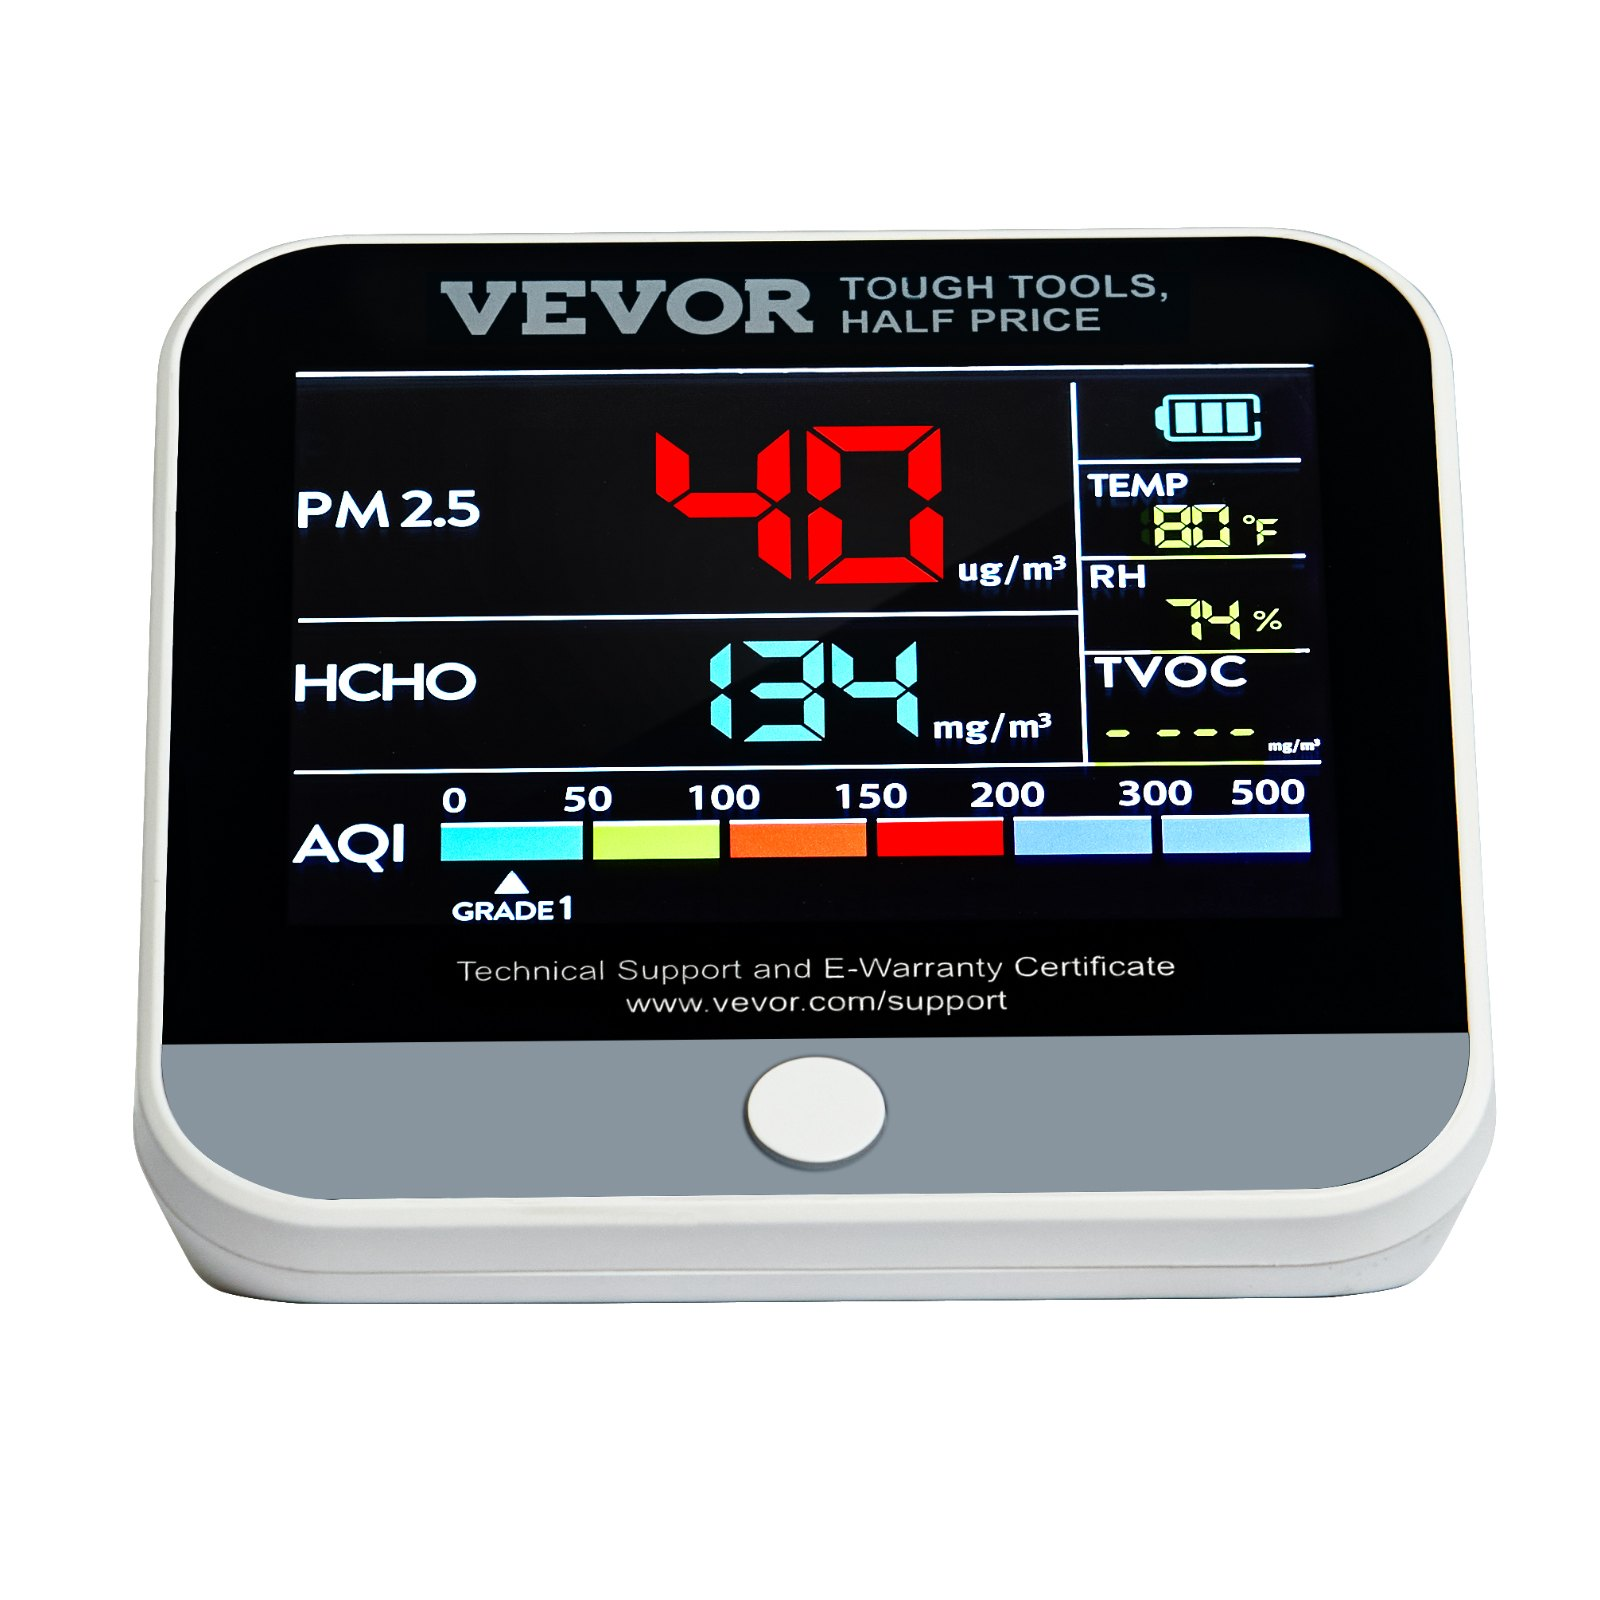 VEVOR Mini Air Quality Monitor 8-IN-1, Professional PM2.5 PM10 PM1.0 Particle Counter, Formaldehyde, Temperature, Humidity, TVOC AQI Tester for Indoor/Outdoor, Air Quality Meter  w/Alarm Thresholds, Goodies N Stuff